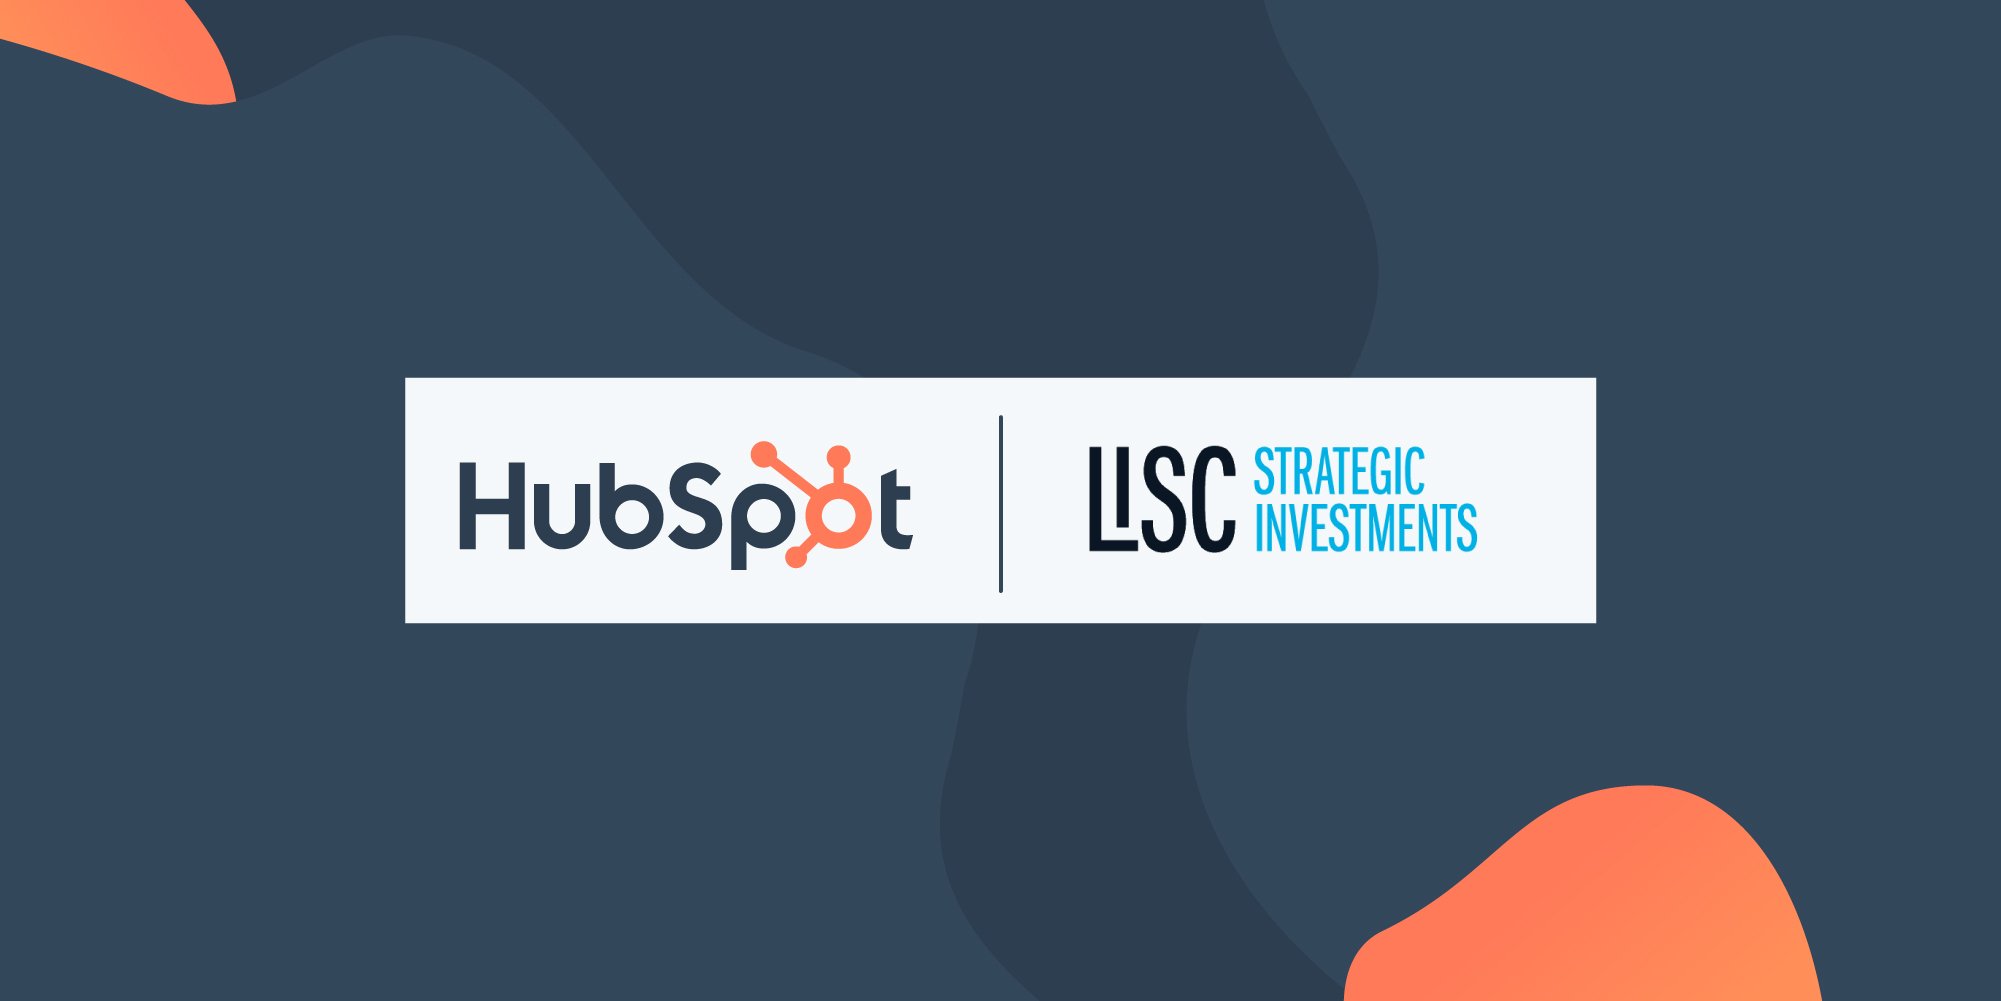 HubSpot Announces $20 Million Commitment to Social Impact Investing